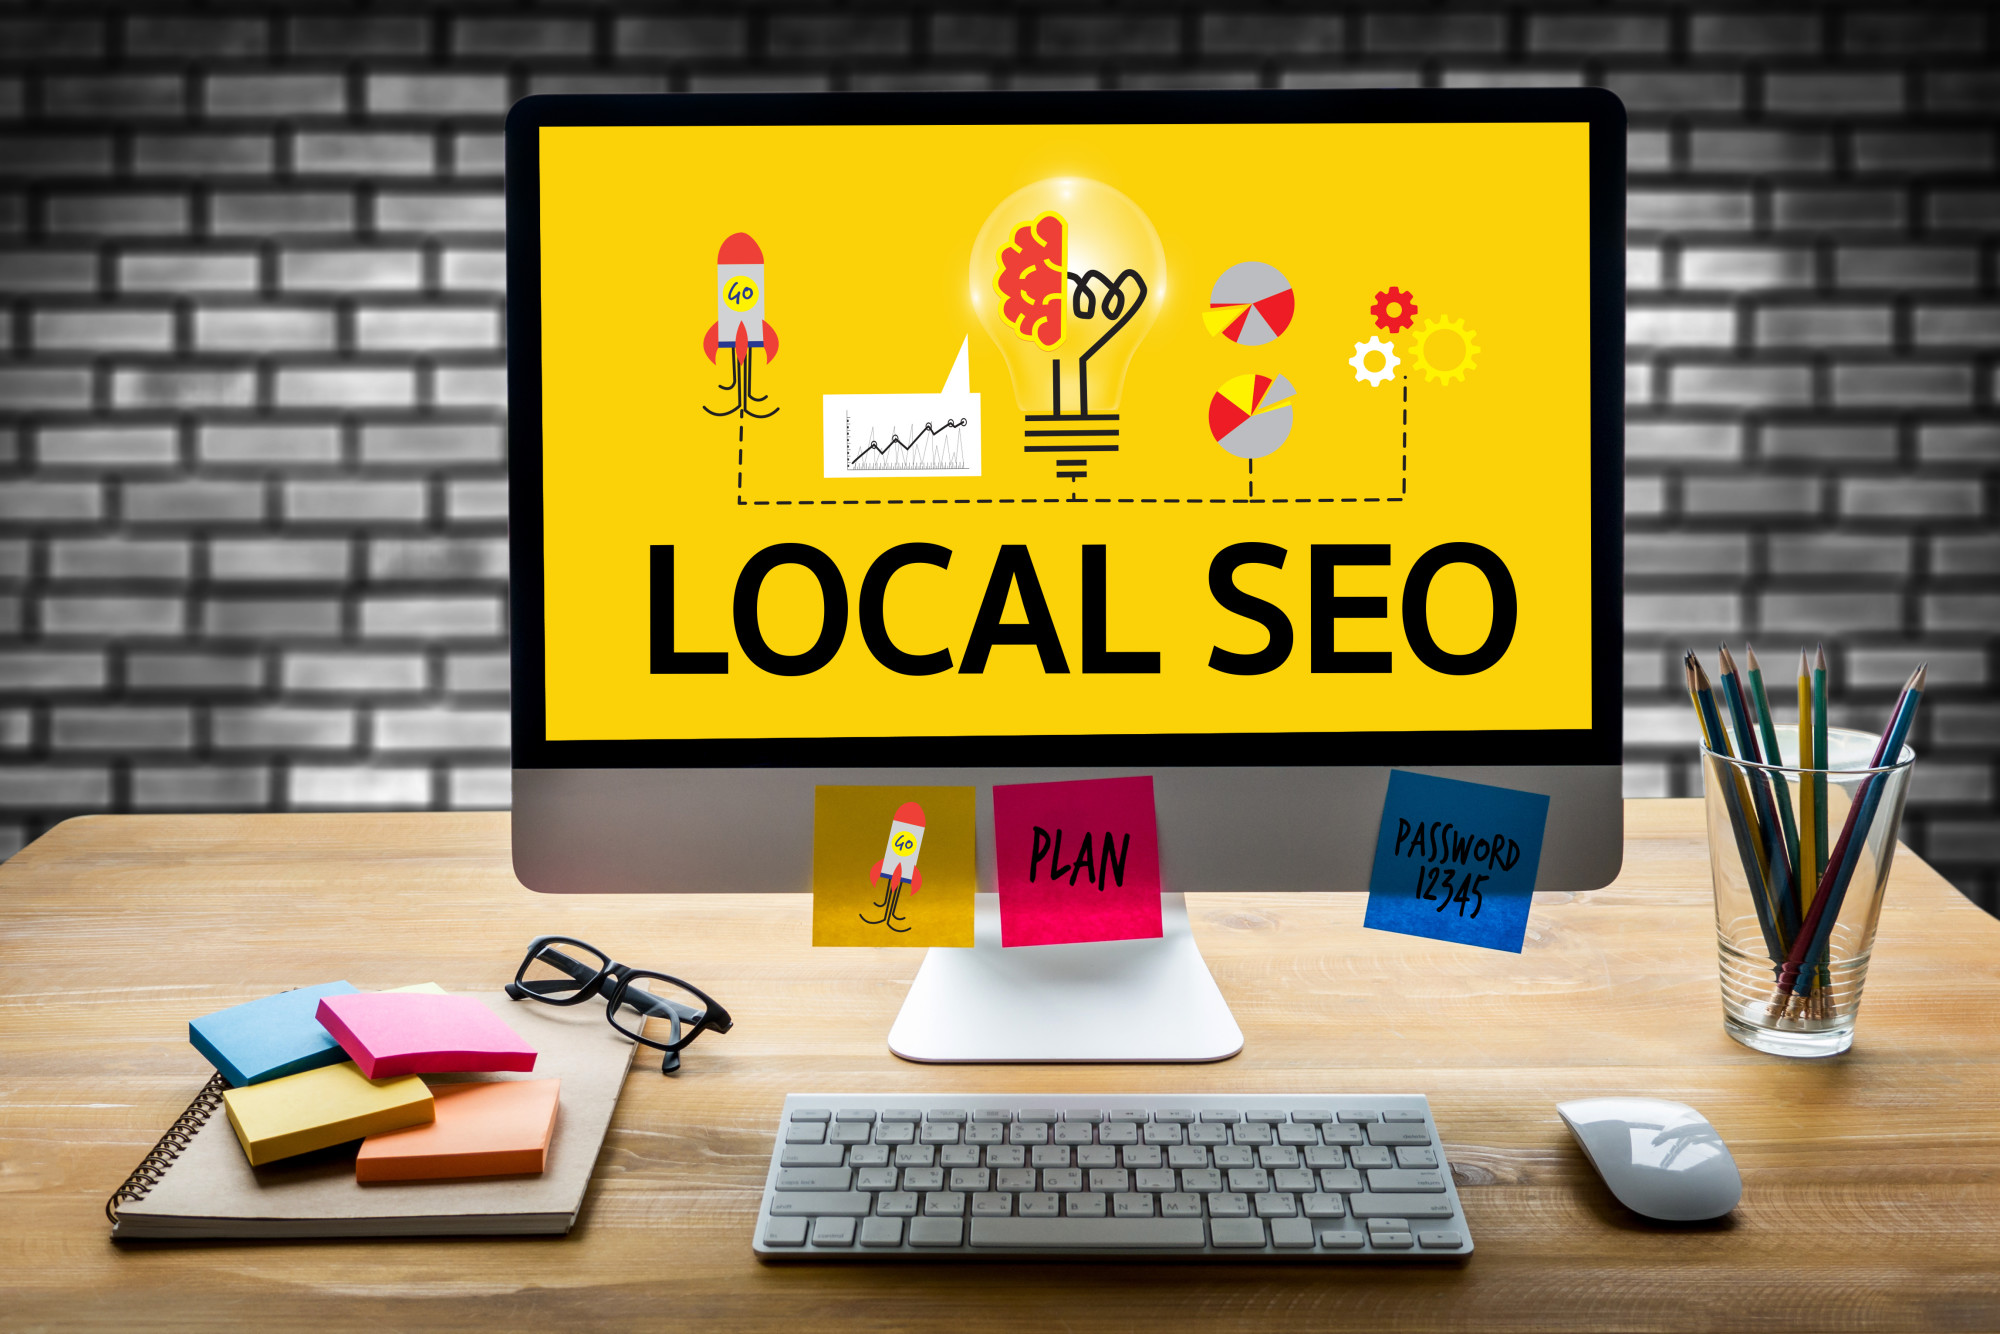 Where Are You Located? Local SEO for Small Businesses